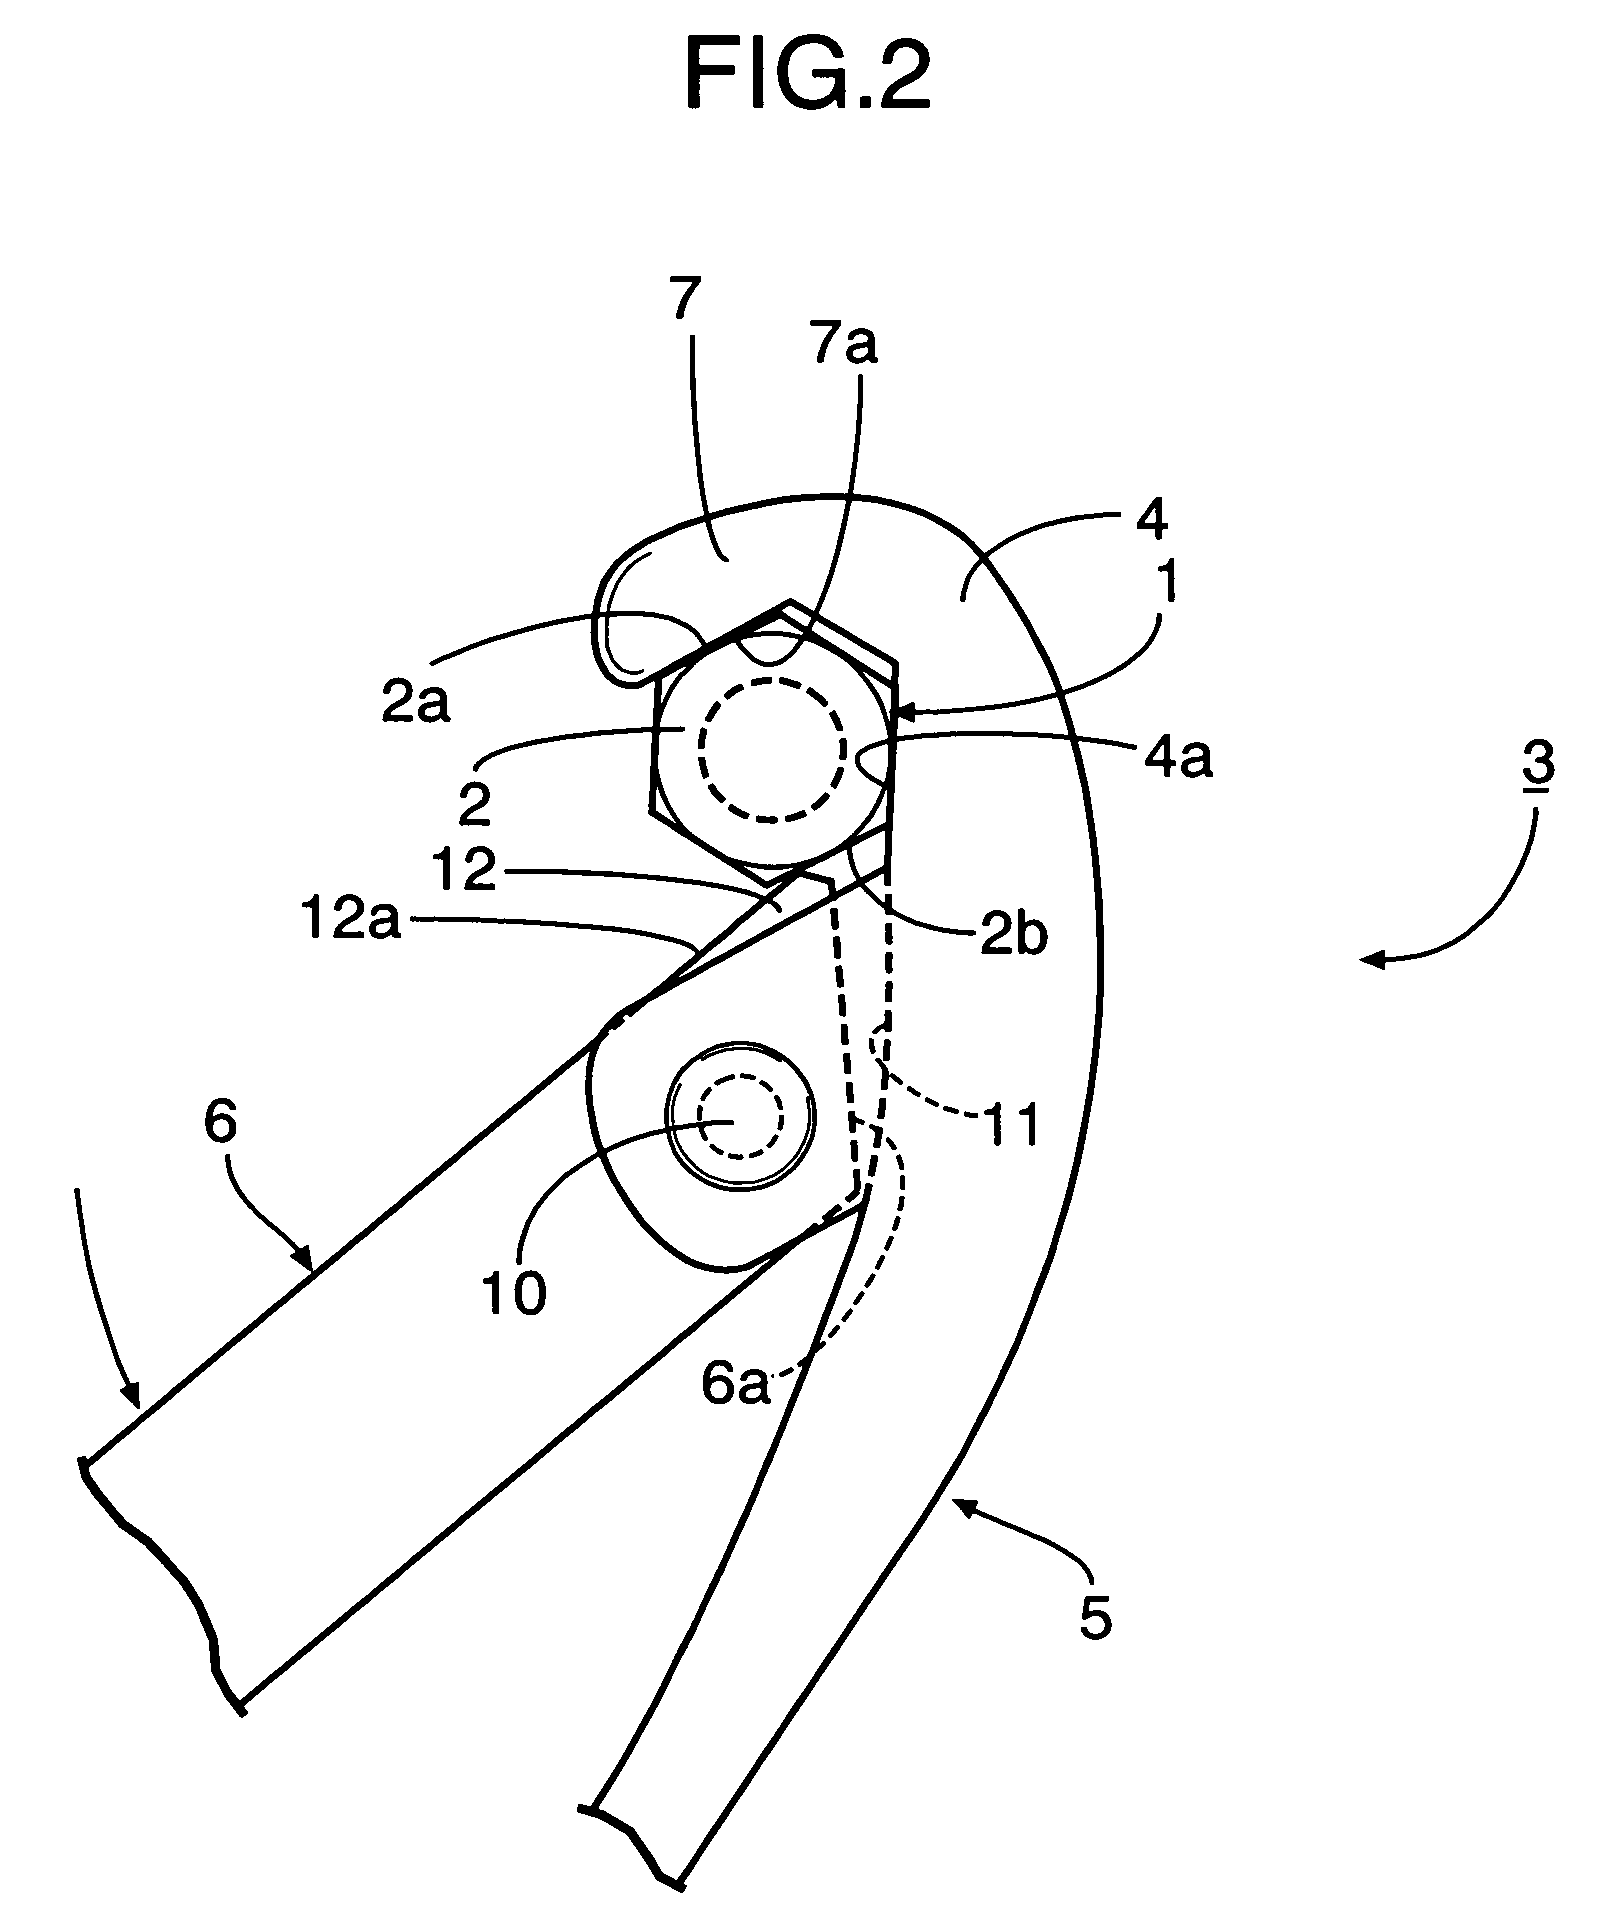 Rotatively operating tool for rotatively operated member having a pair of engaging surfaces